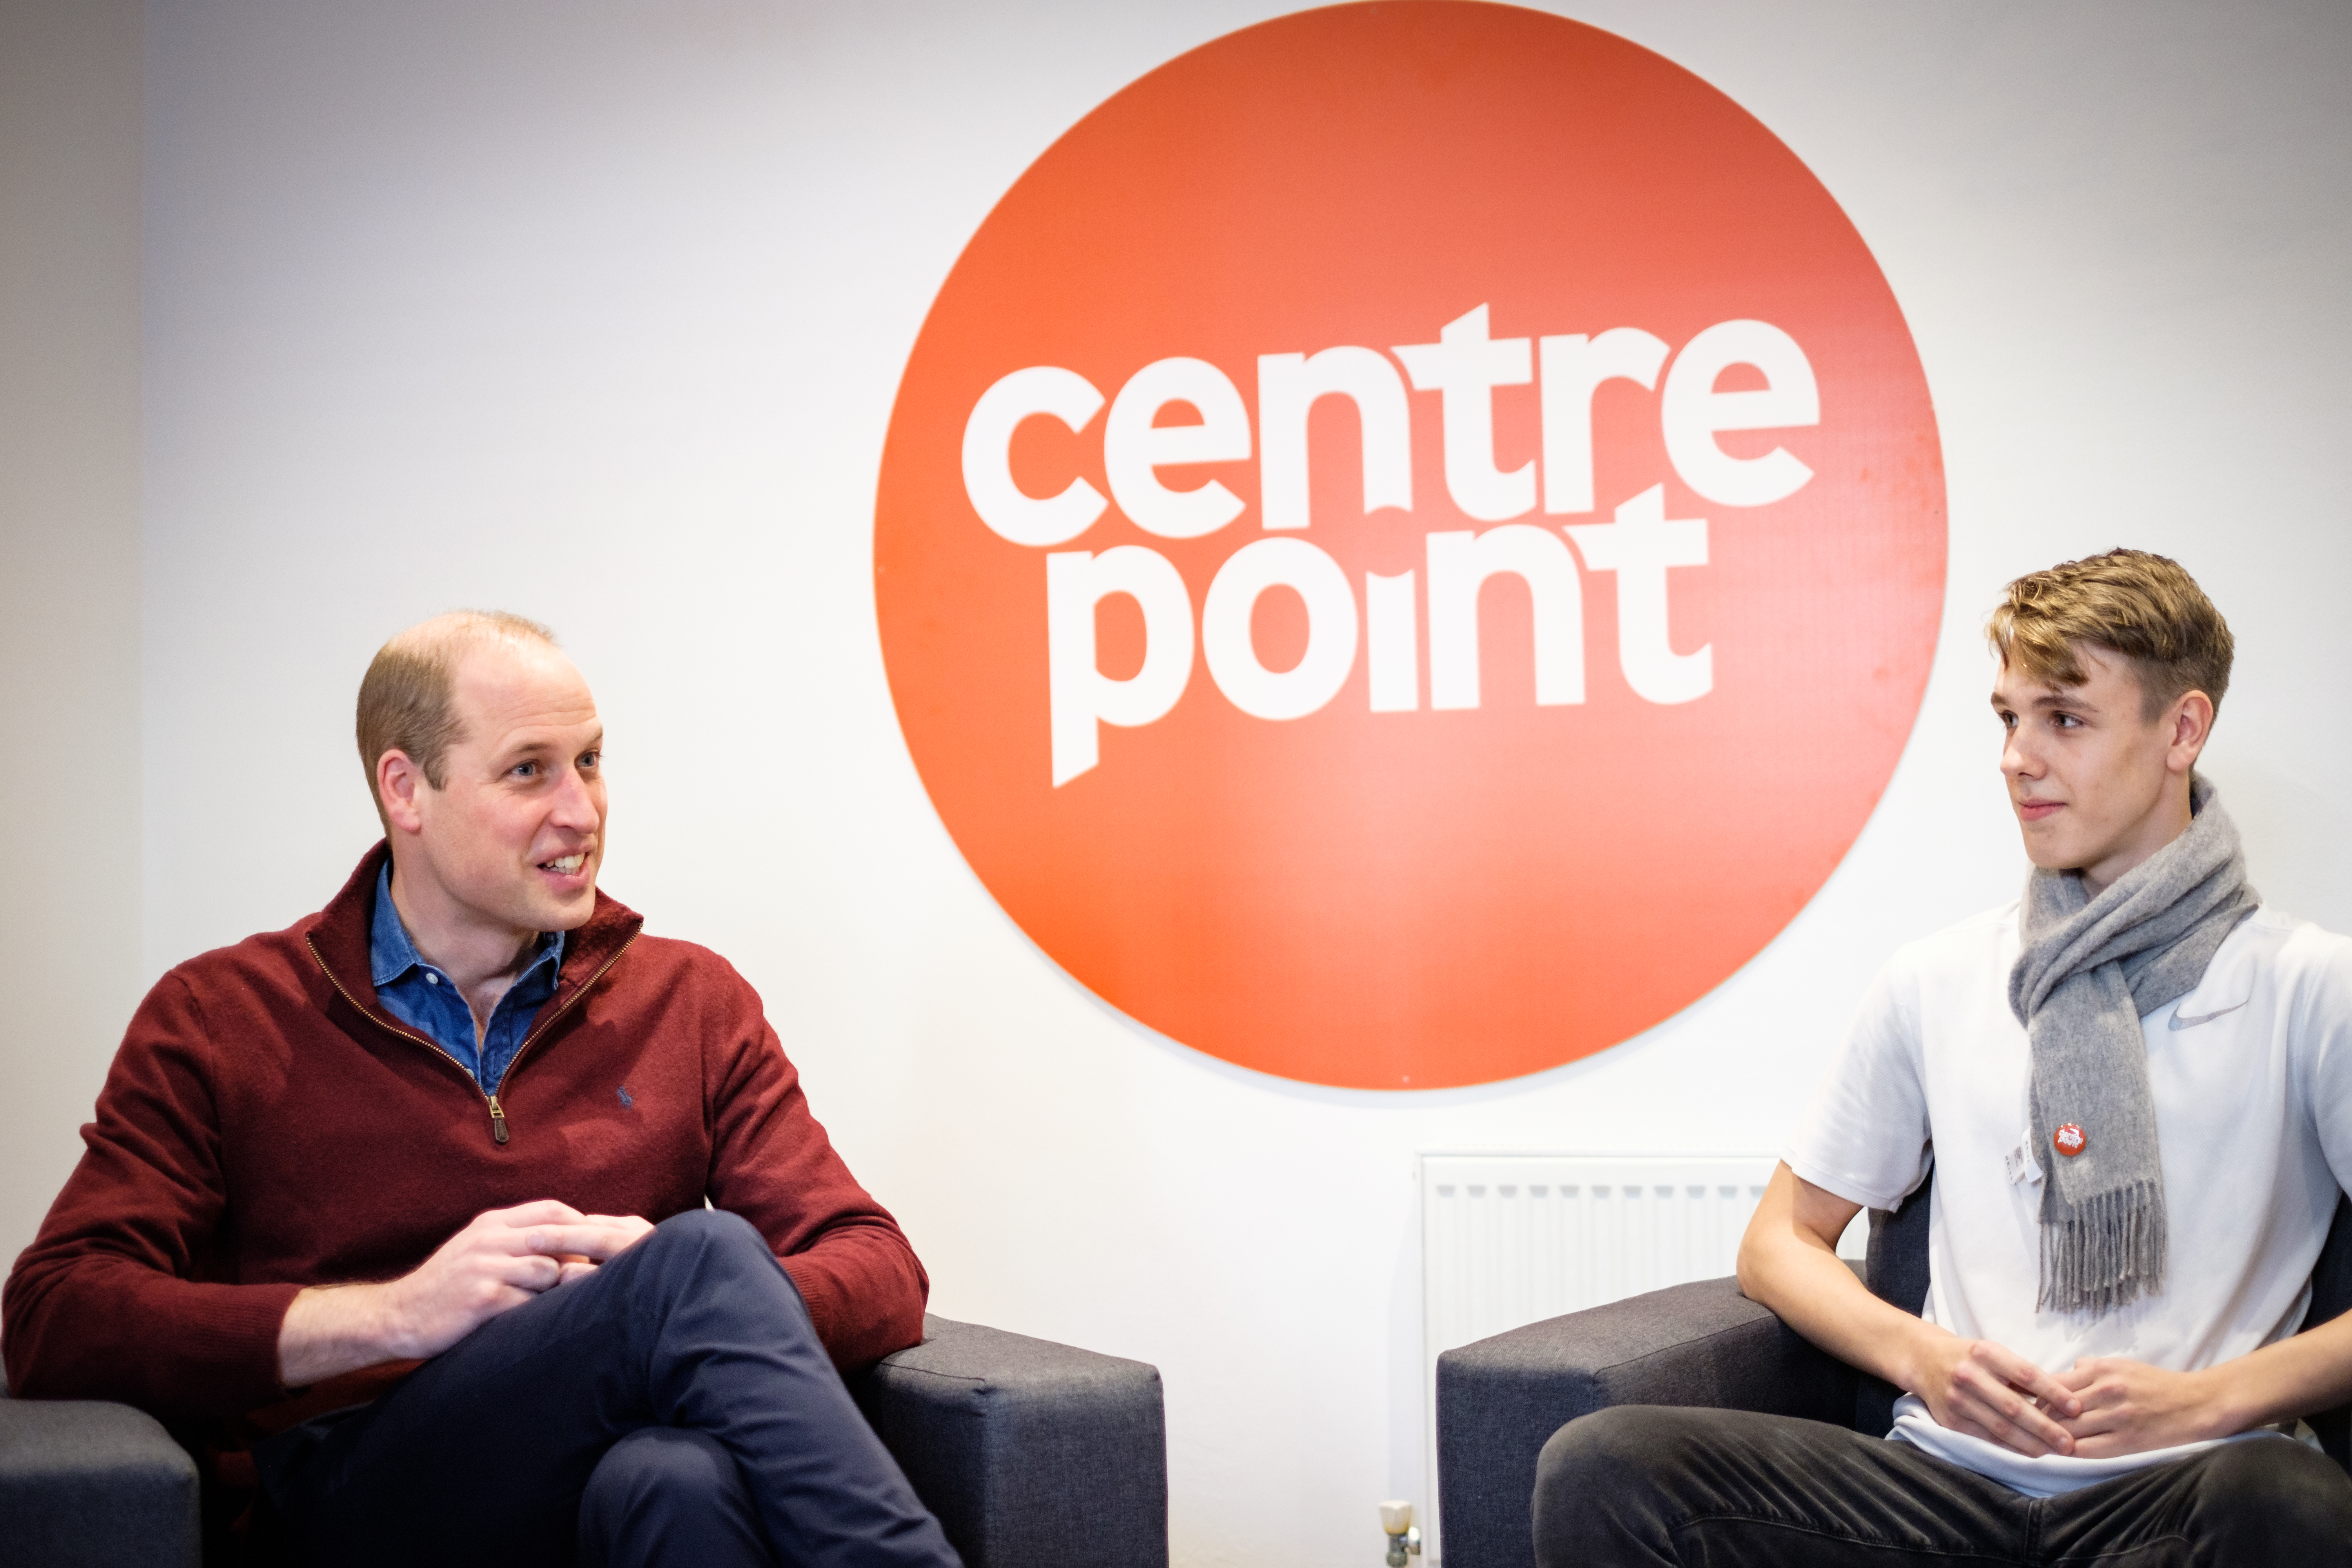 The Duke of Cambridge meets residents at Centrepoint's new Apprenticeship House in London.